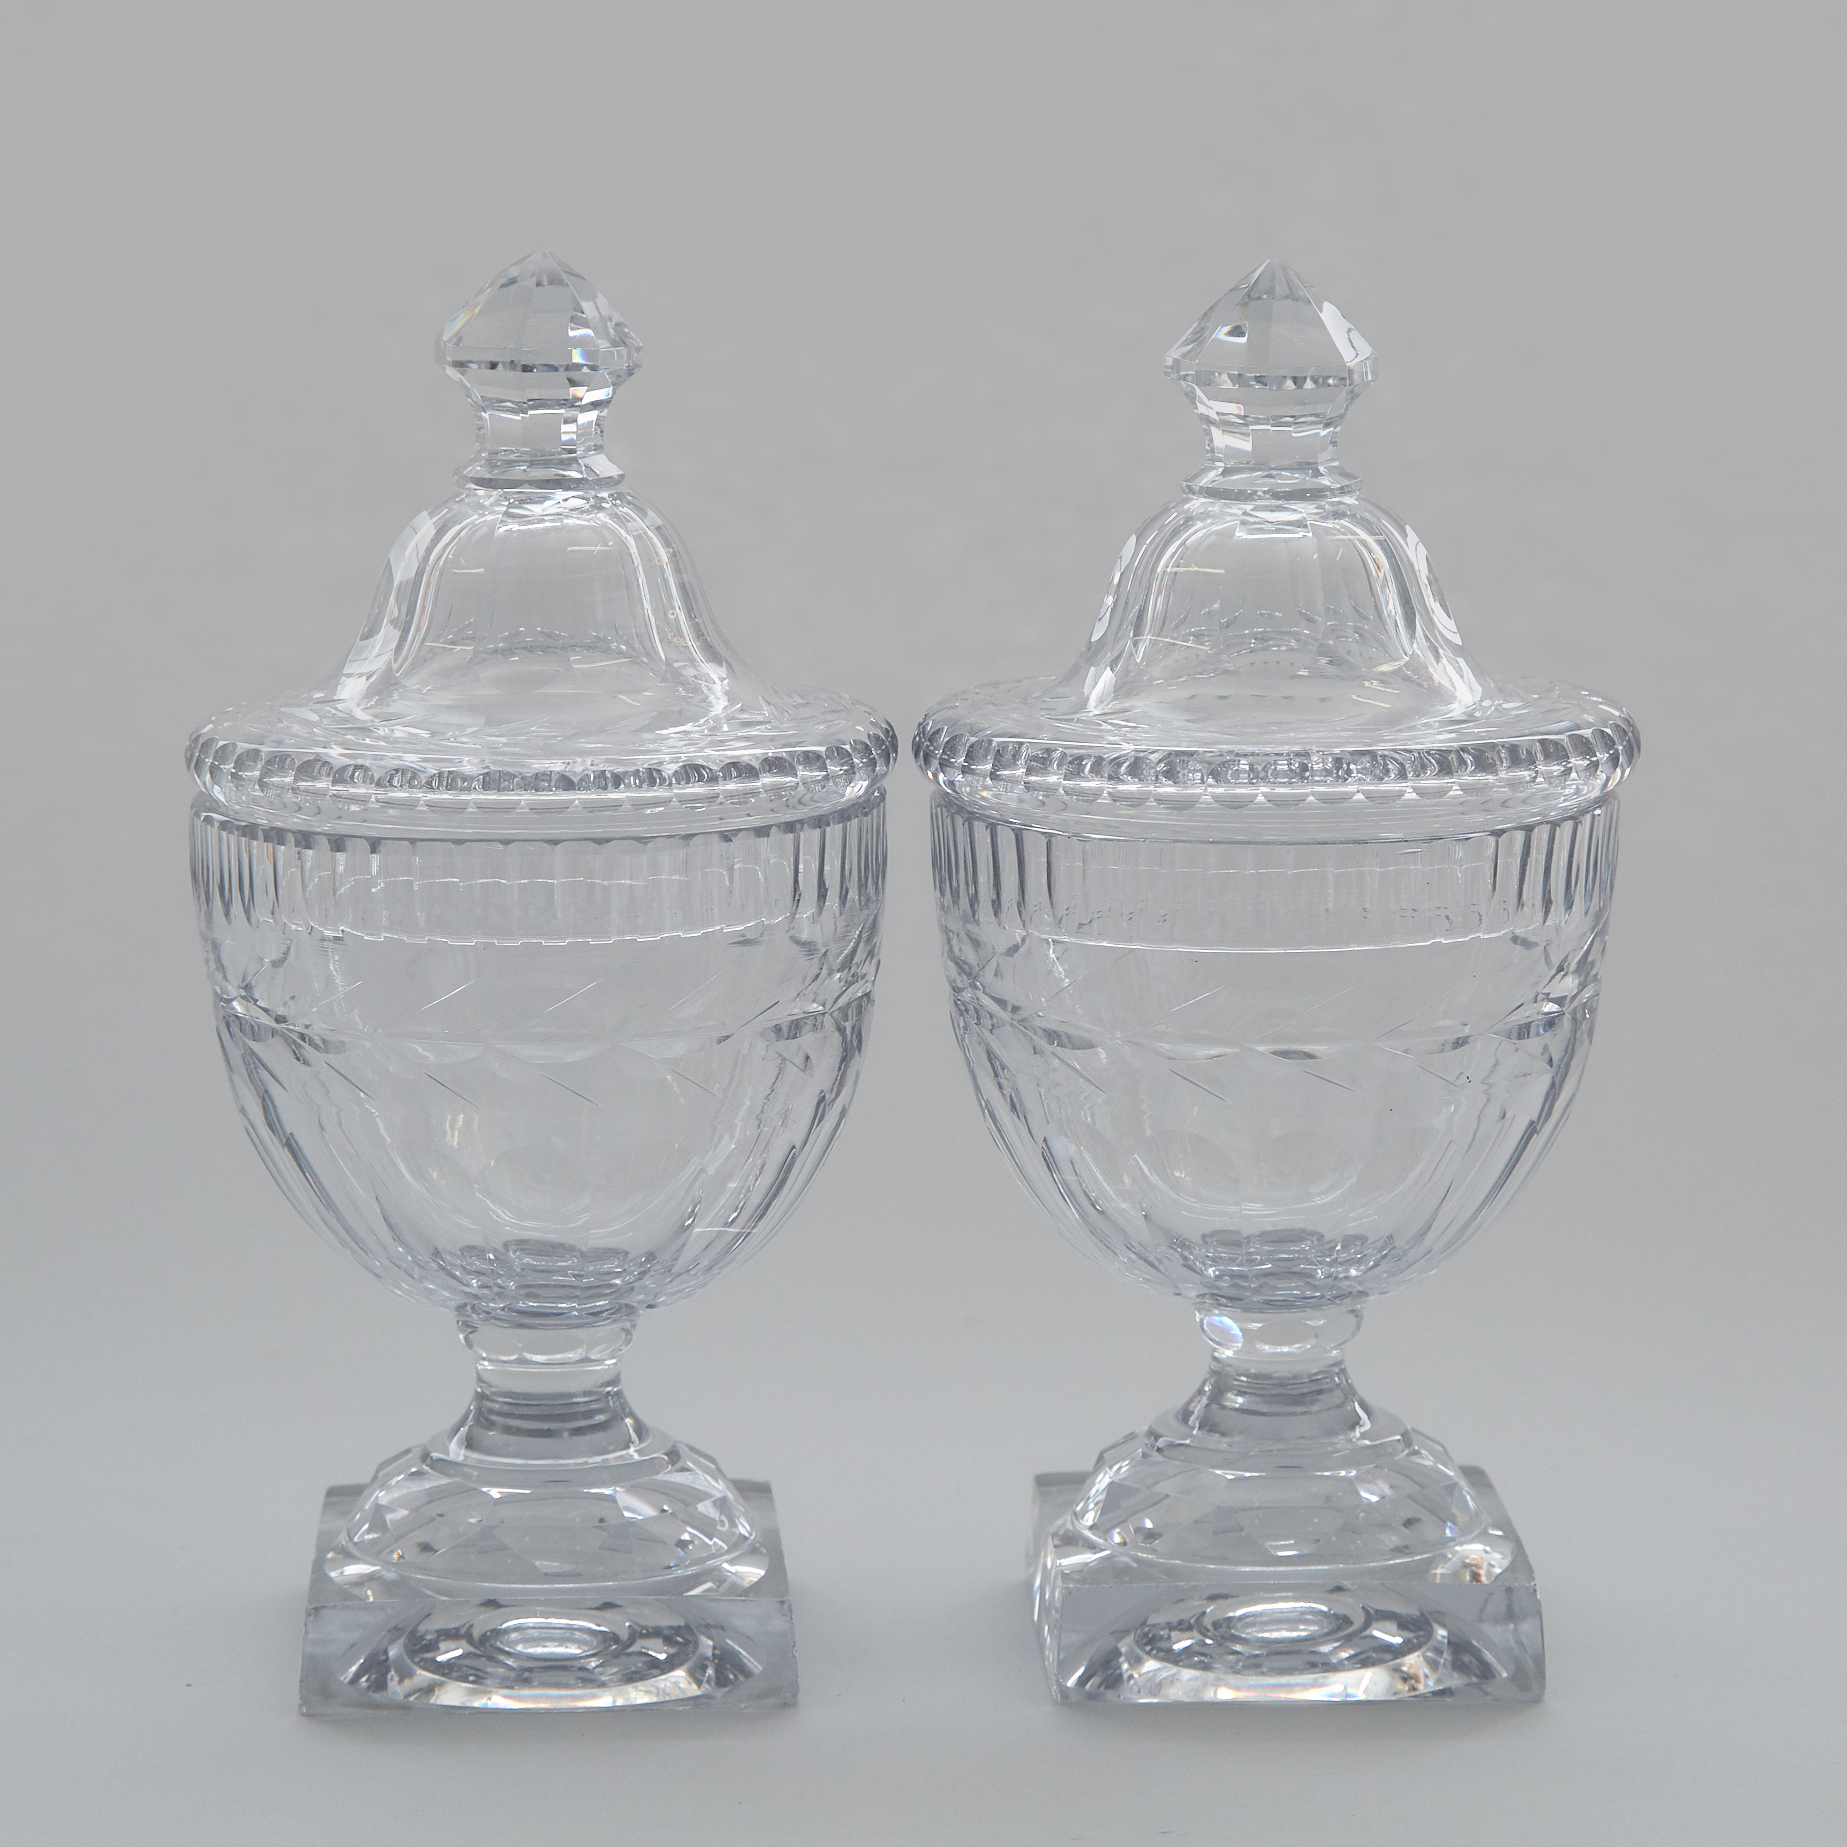 Pair of Anglo-Irish Cut Glass Sweetmeat Vases and Covers, 19th century